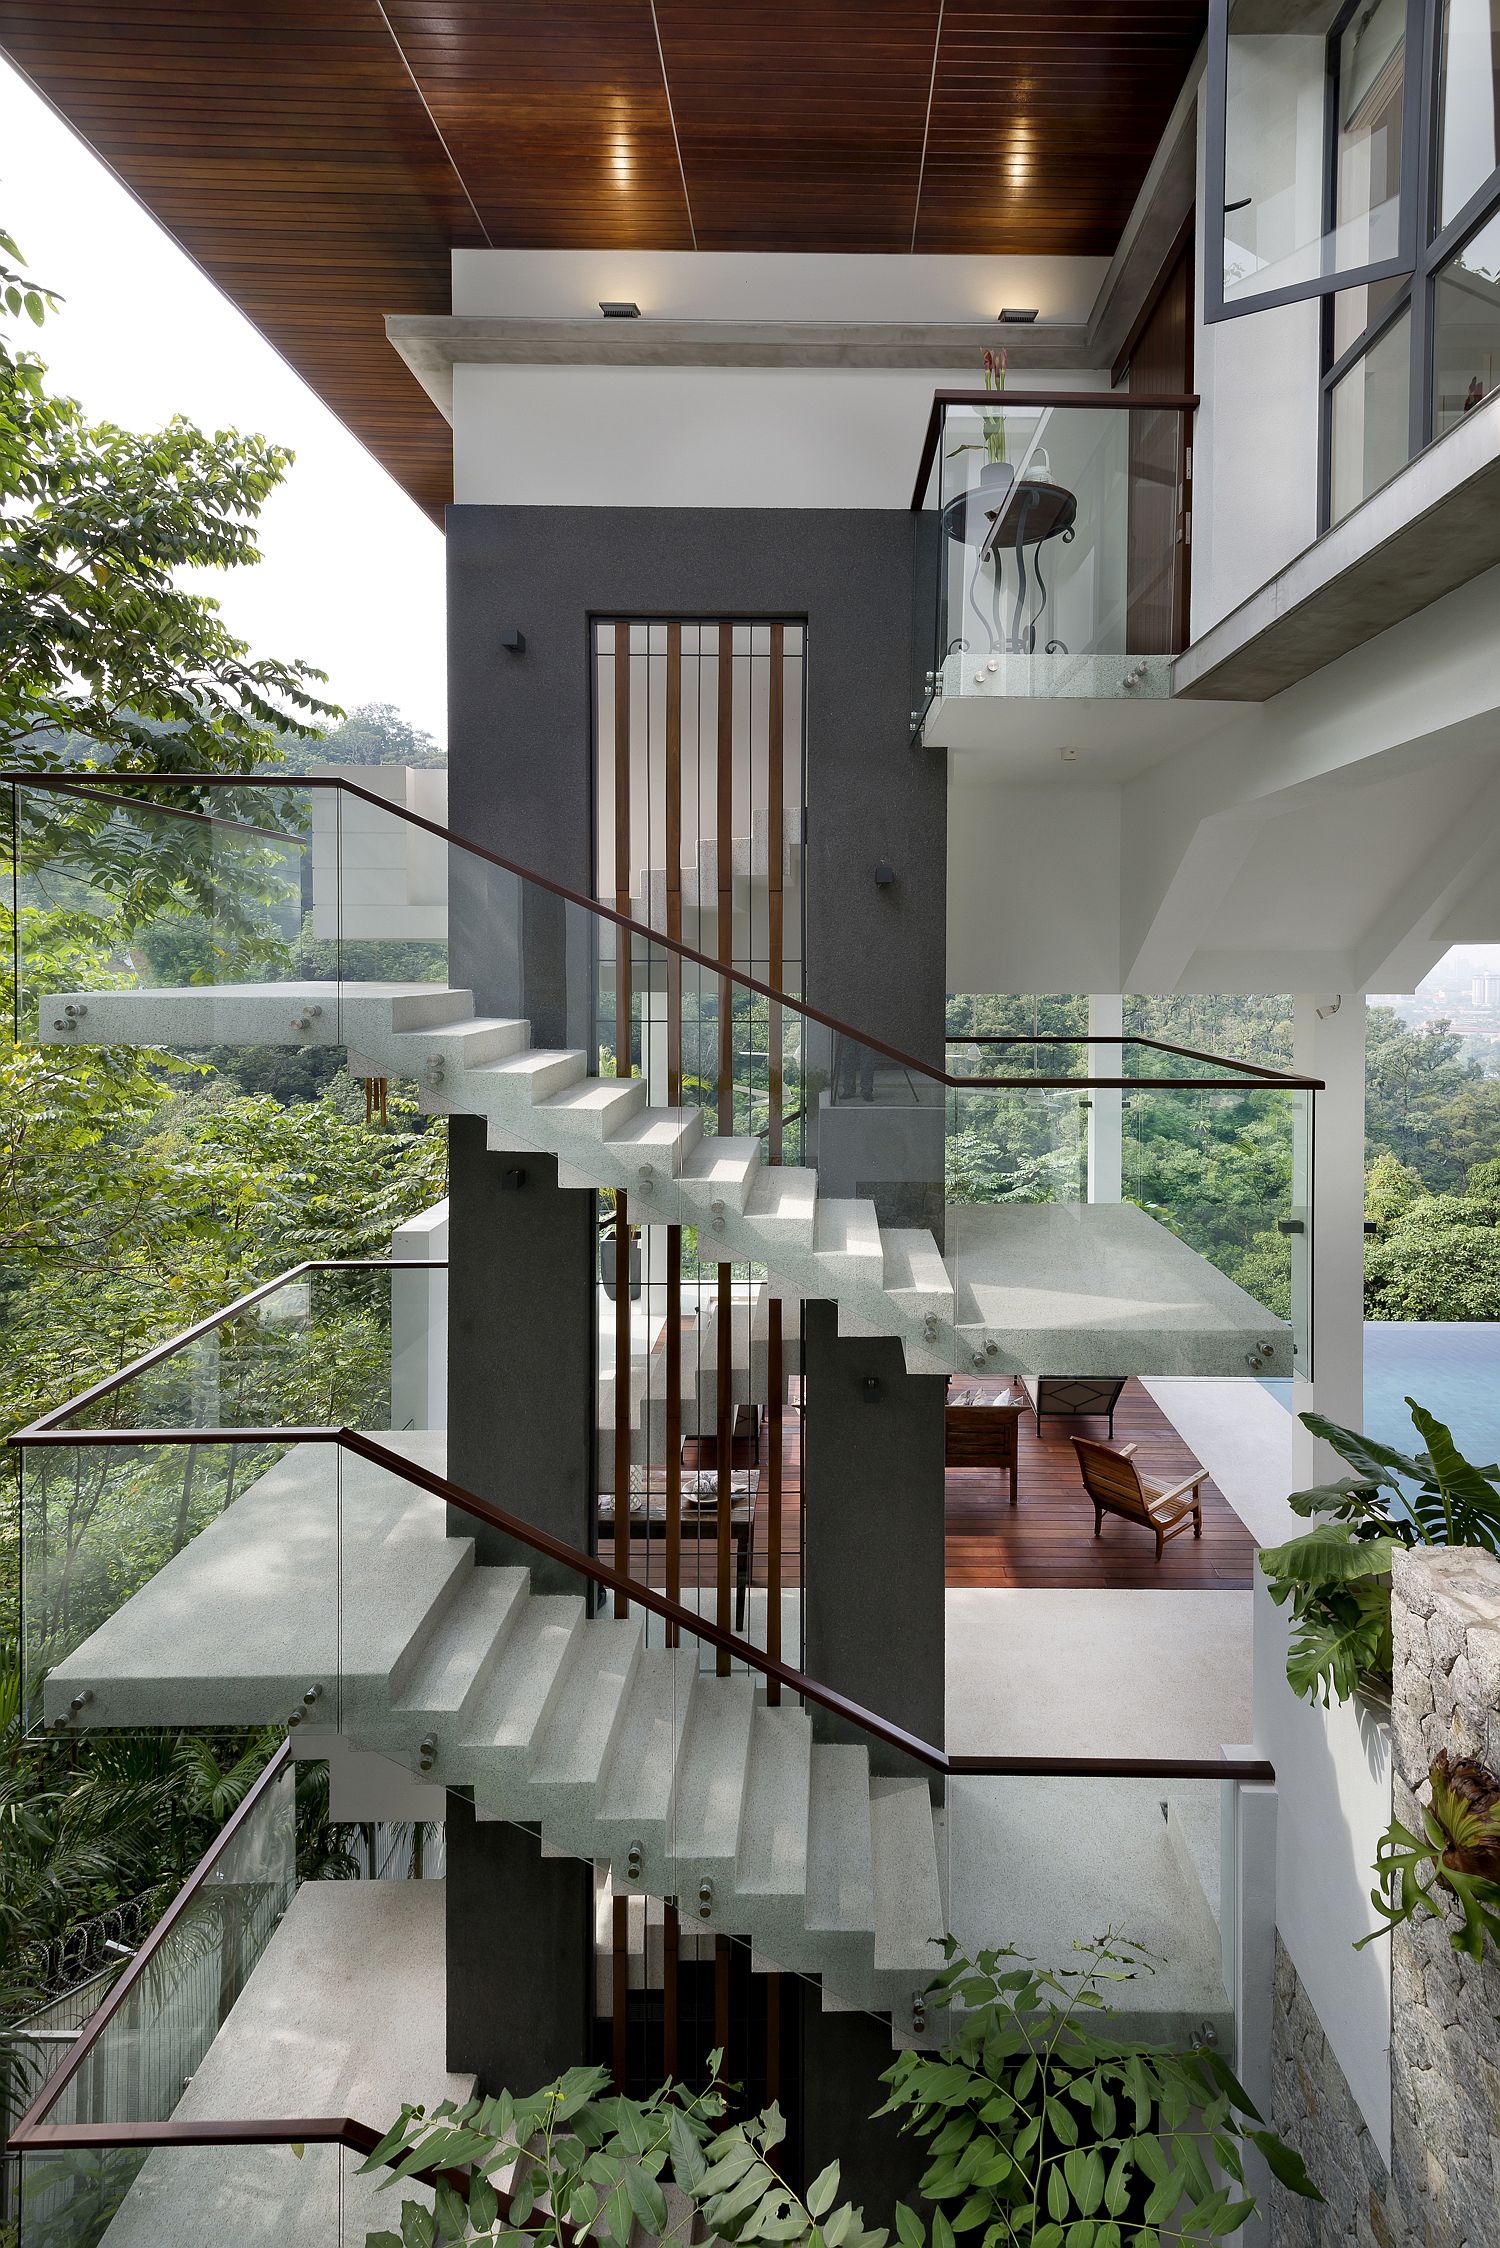 Gorgeous staircases connect the variors levels of the house